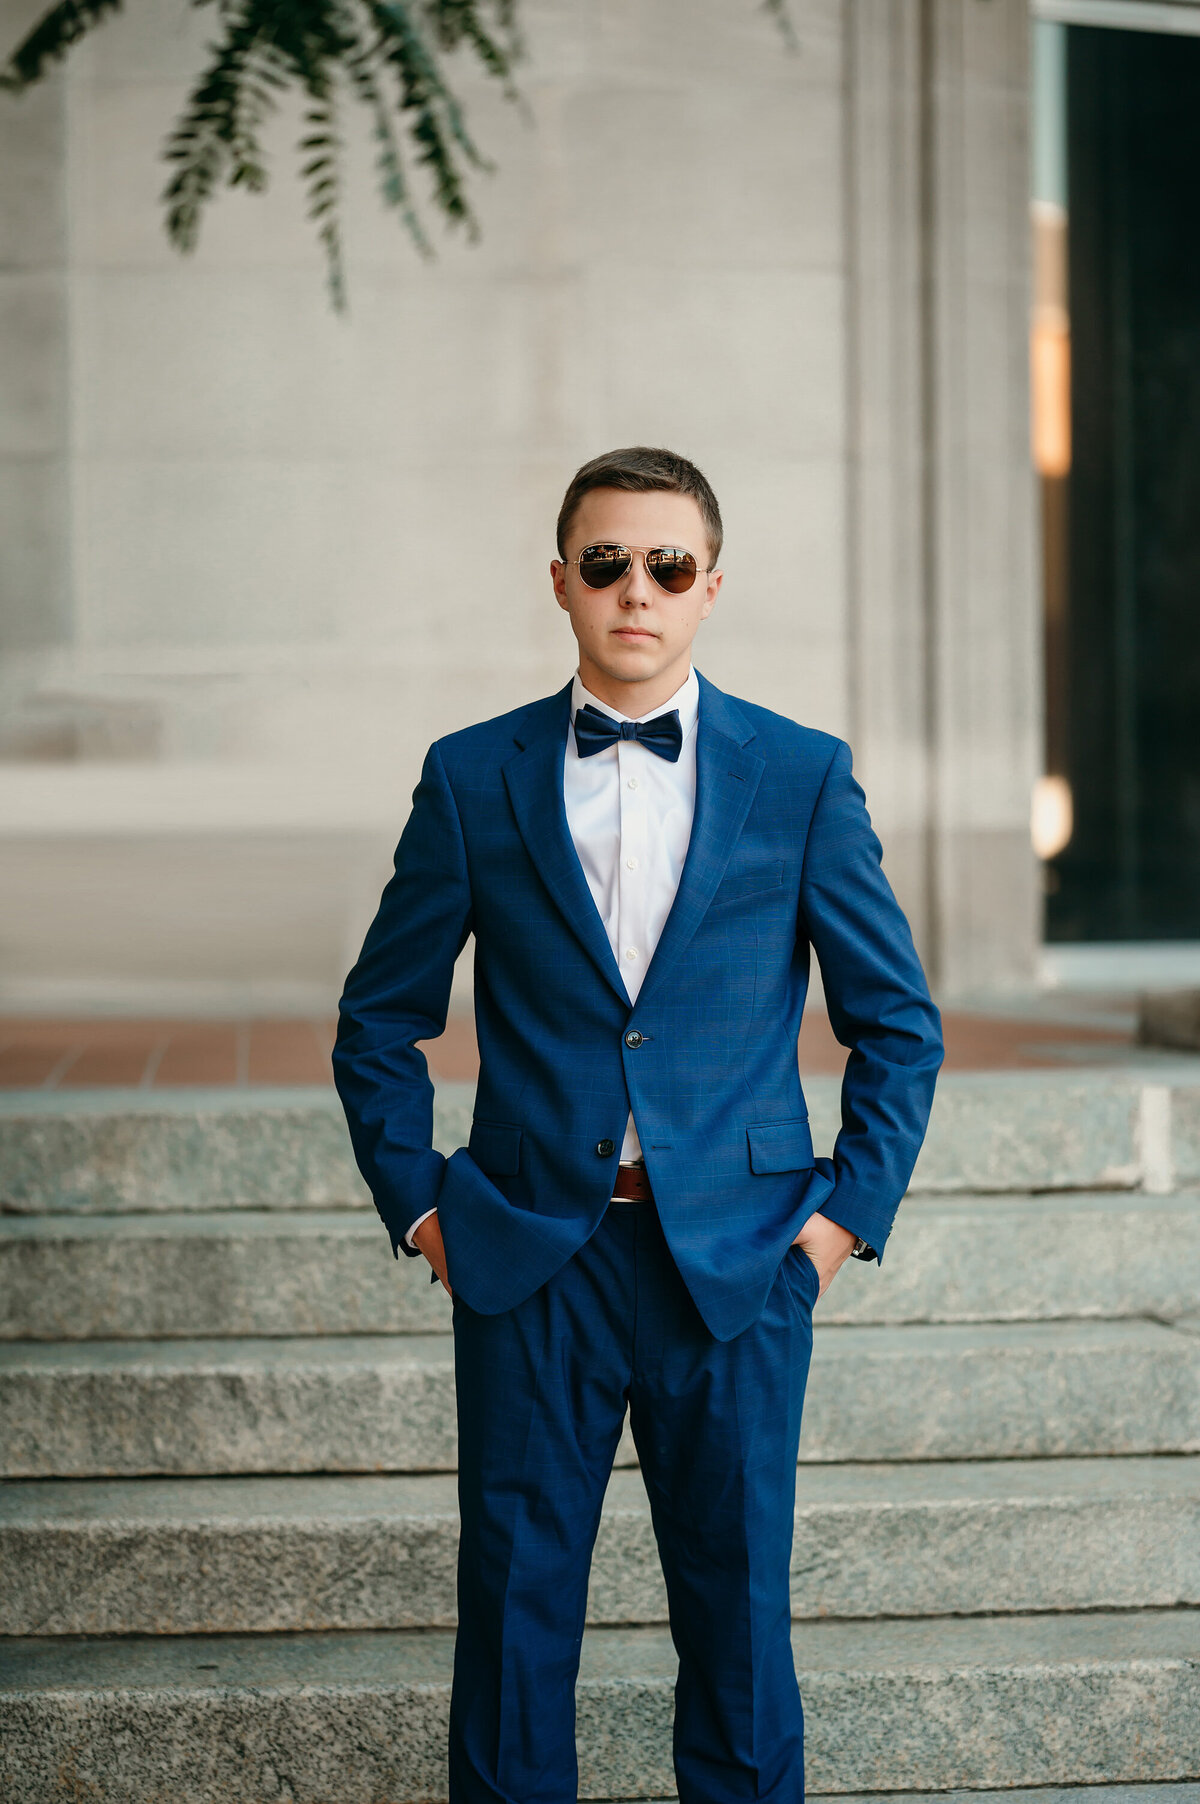 A male student from Waukesha North High School stands on the courthouse steps wearing a navy suit, bowtie and aviator sunglasses during his senior portrait session.